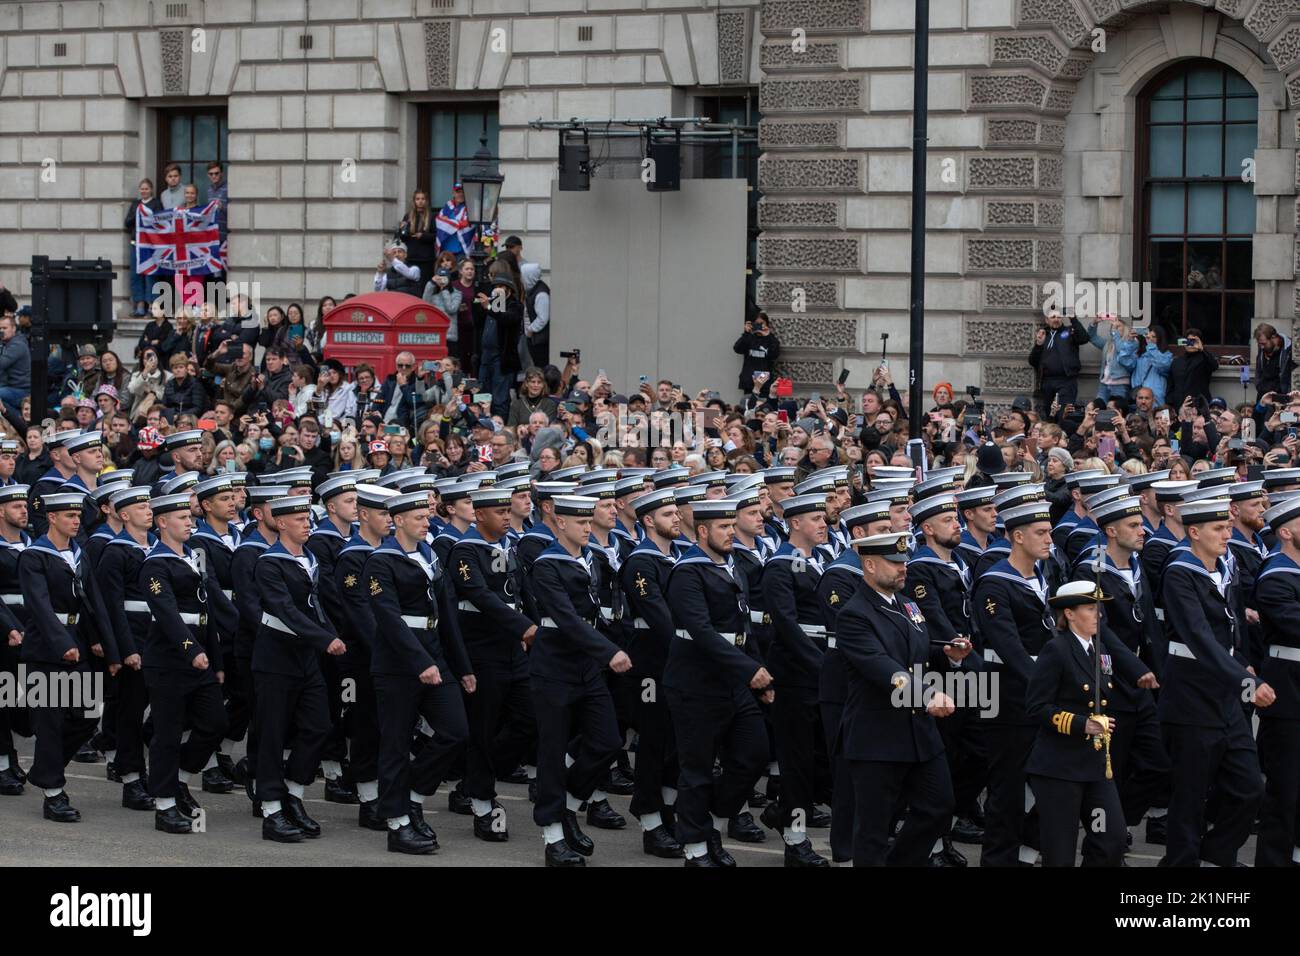 London, England. 19th September, 2022. Members of the Royal Navy took part in a procession for State Funeral of Queen Elizabeth II. The event was held in London and Windsor today and was one of the biggest the country has ever seen. Credit: Kiki Streitberger / Alamy Live News Stock Photo